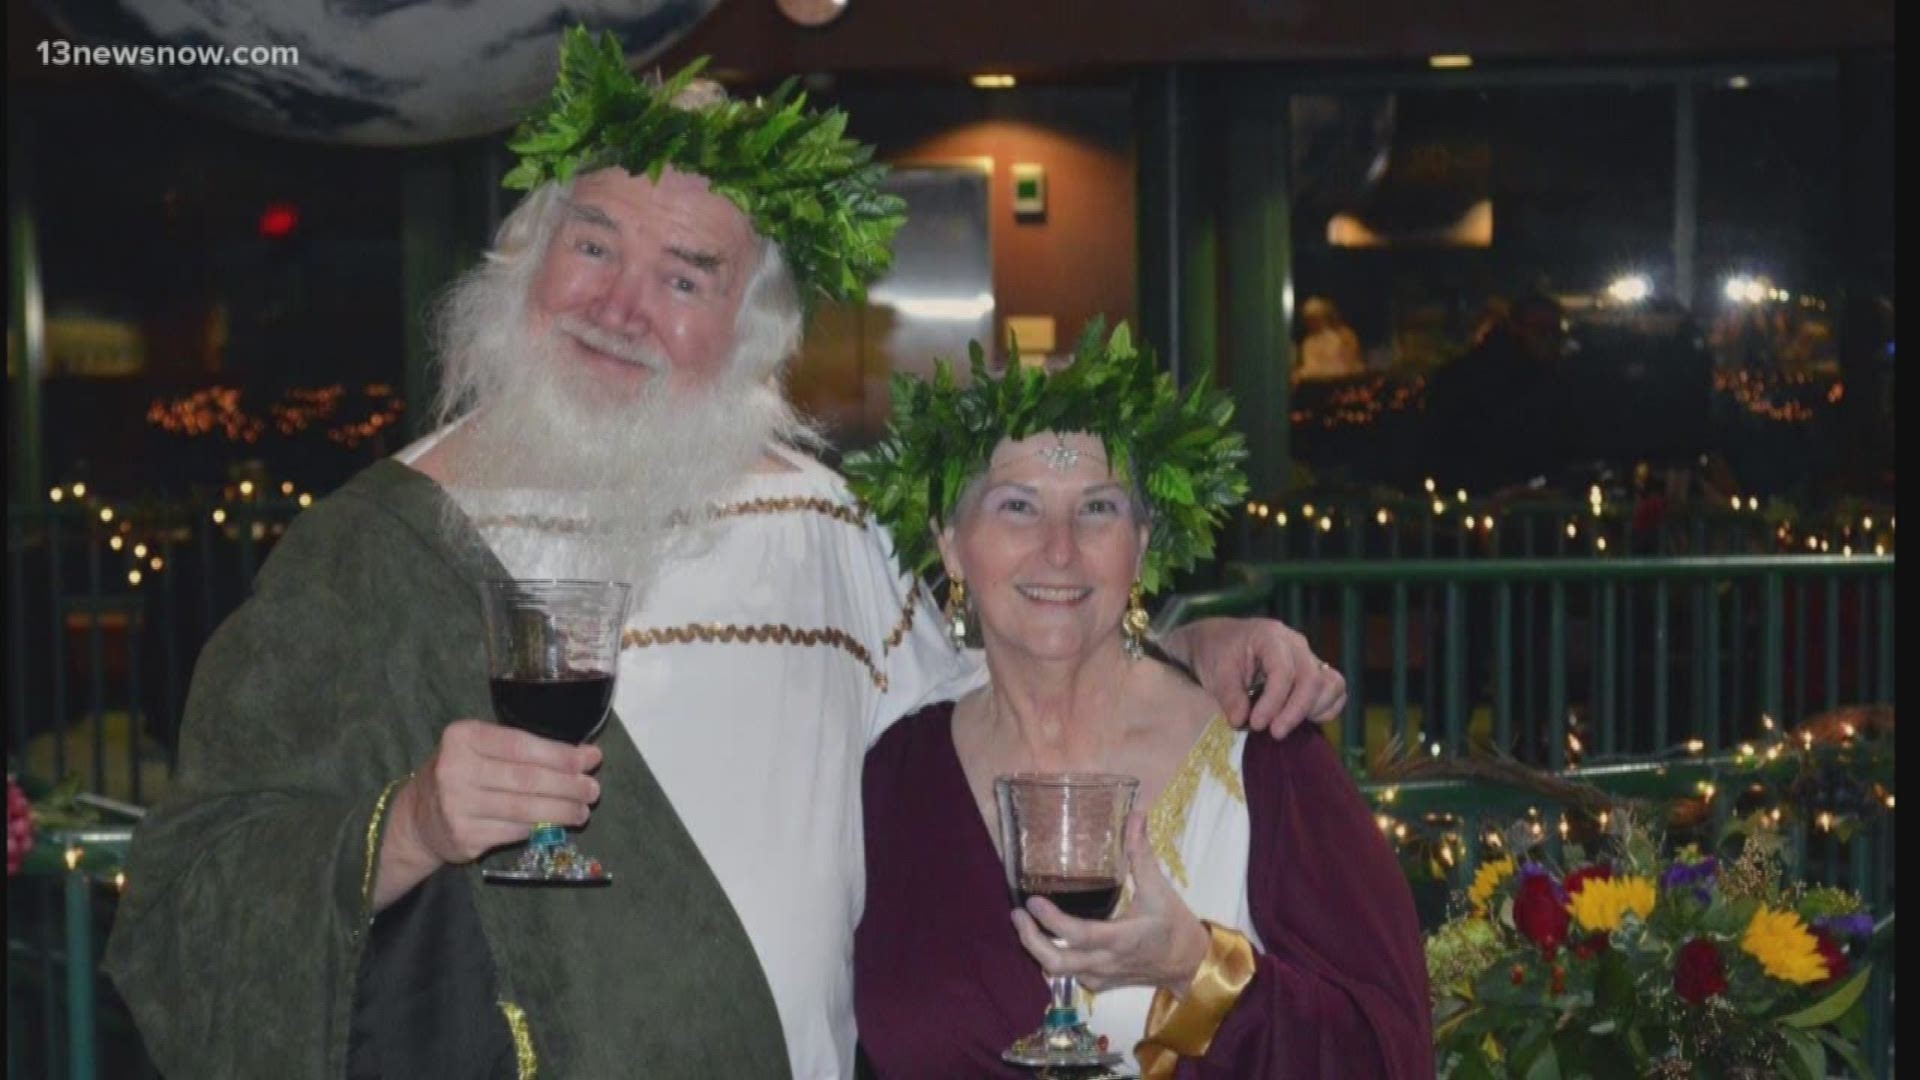 The Virginia Living Museum Bacchus wine and food festival returns for its 15th year!